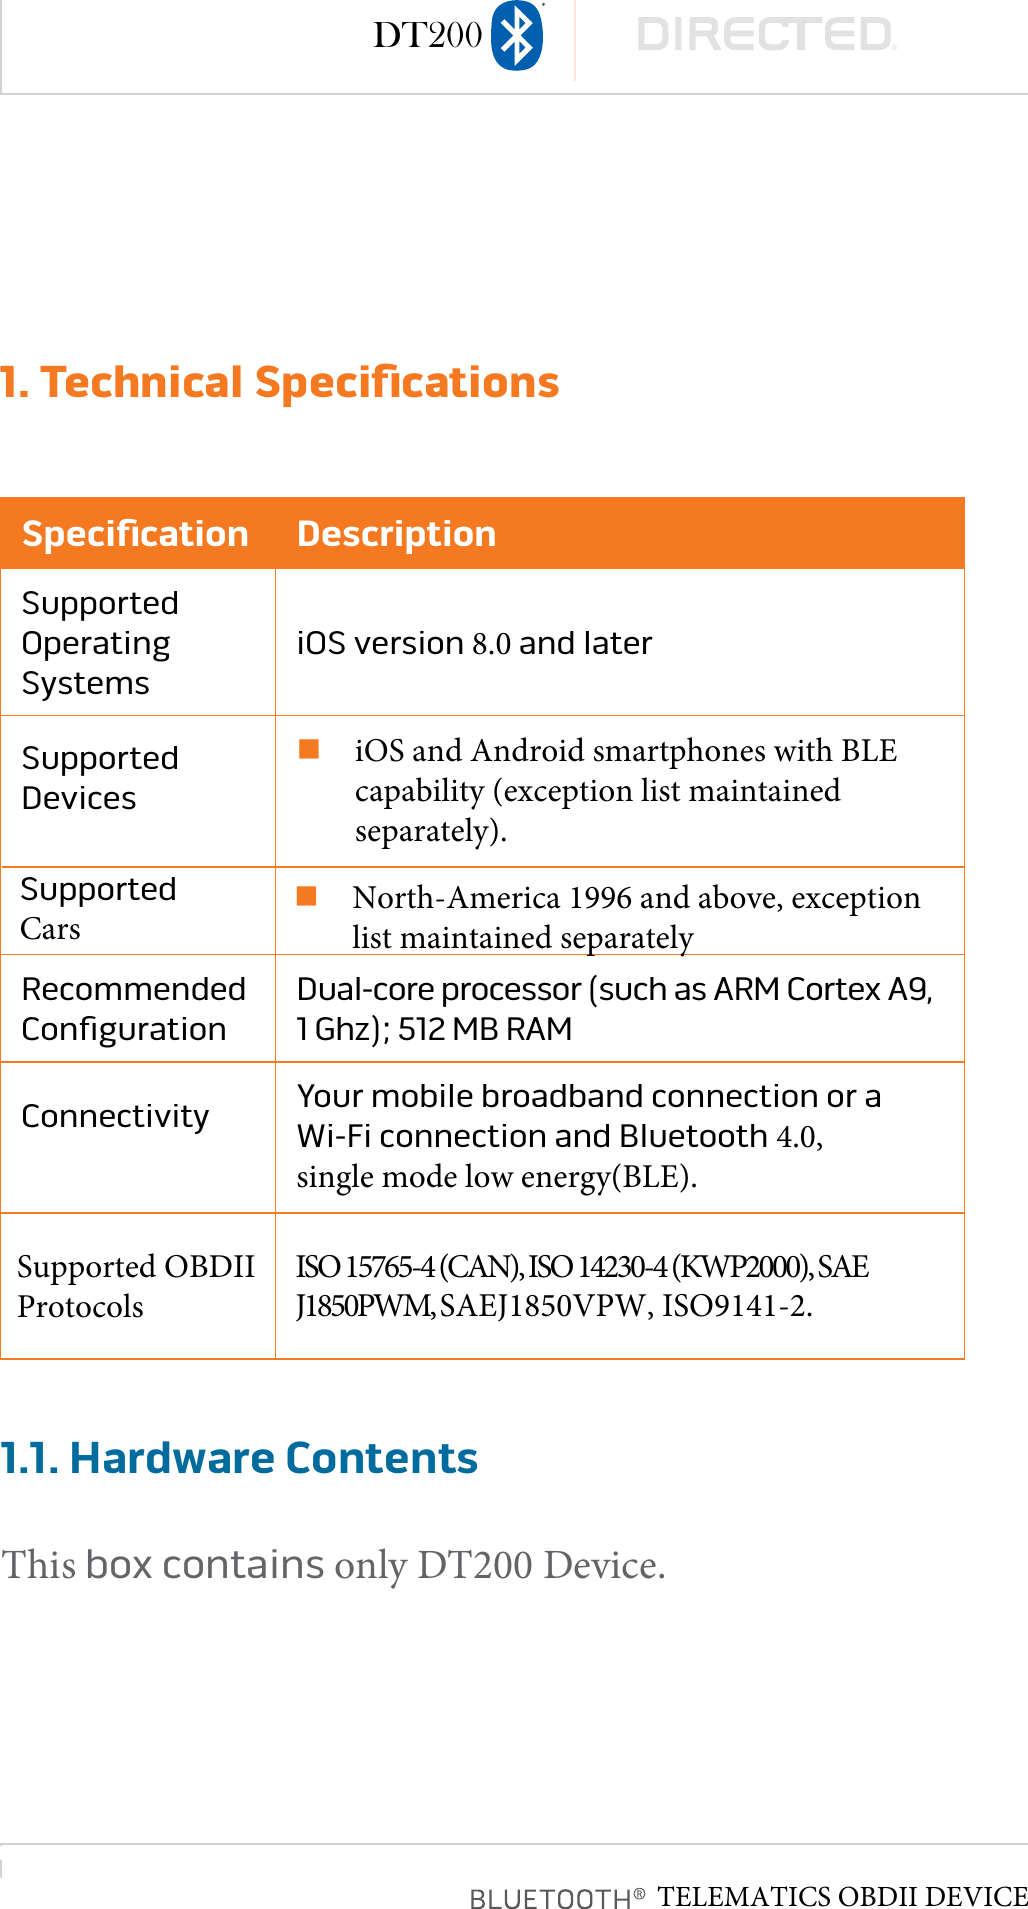 page 51. Technical SpeciﬁcationsSpeciﬁcation DescriptionSupported Operating SystemsiOS version 8.0 and laterSupported DevicesniOS and Android smartphones with BLEcapability (exception list maintainedseparately).Recommended  ConﬁgurationDual-core processor (such as ARM Cortex A9, 1 Ghz); 512 MB RAMConnectivity  Your mobile broadband connection or a Wi-Fi connection and Bluetooth 4.0, single mode low energy(BLE).1.1. Hardware ContentsThis box contains only DT200 Device.DT200Supported OBDII Protocols ISO 15765-4 (CAN), ISO 14230-4 (KWP2000), SAE J1850PWM, SAEJ1850VPW, ISO9141-2.Supported CarsnNorth-America 1996 and above, exceptionlist maintained separatelyTELEMATICS OBDII DEVICE